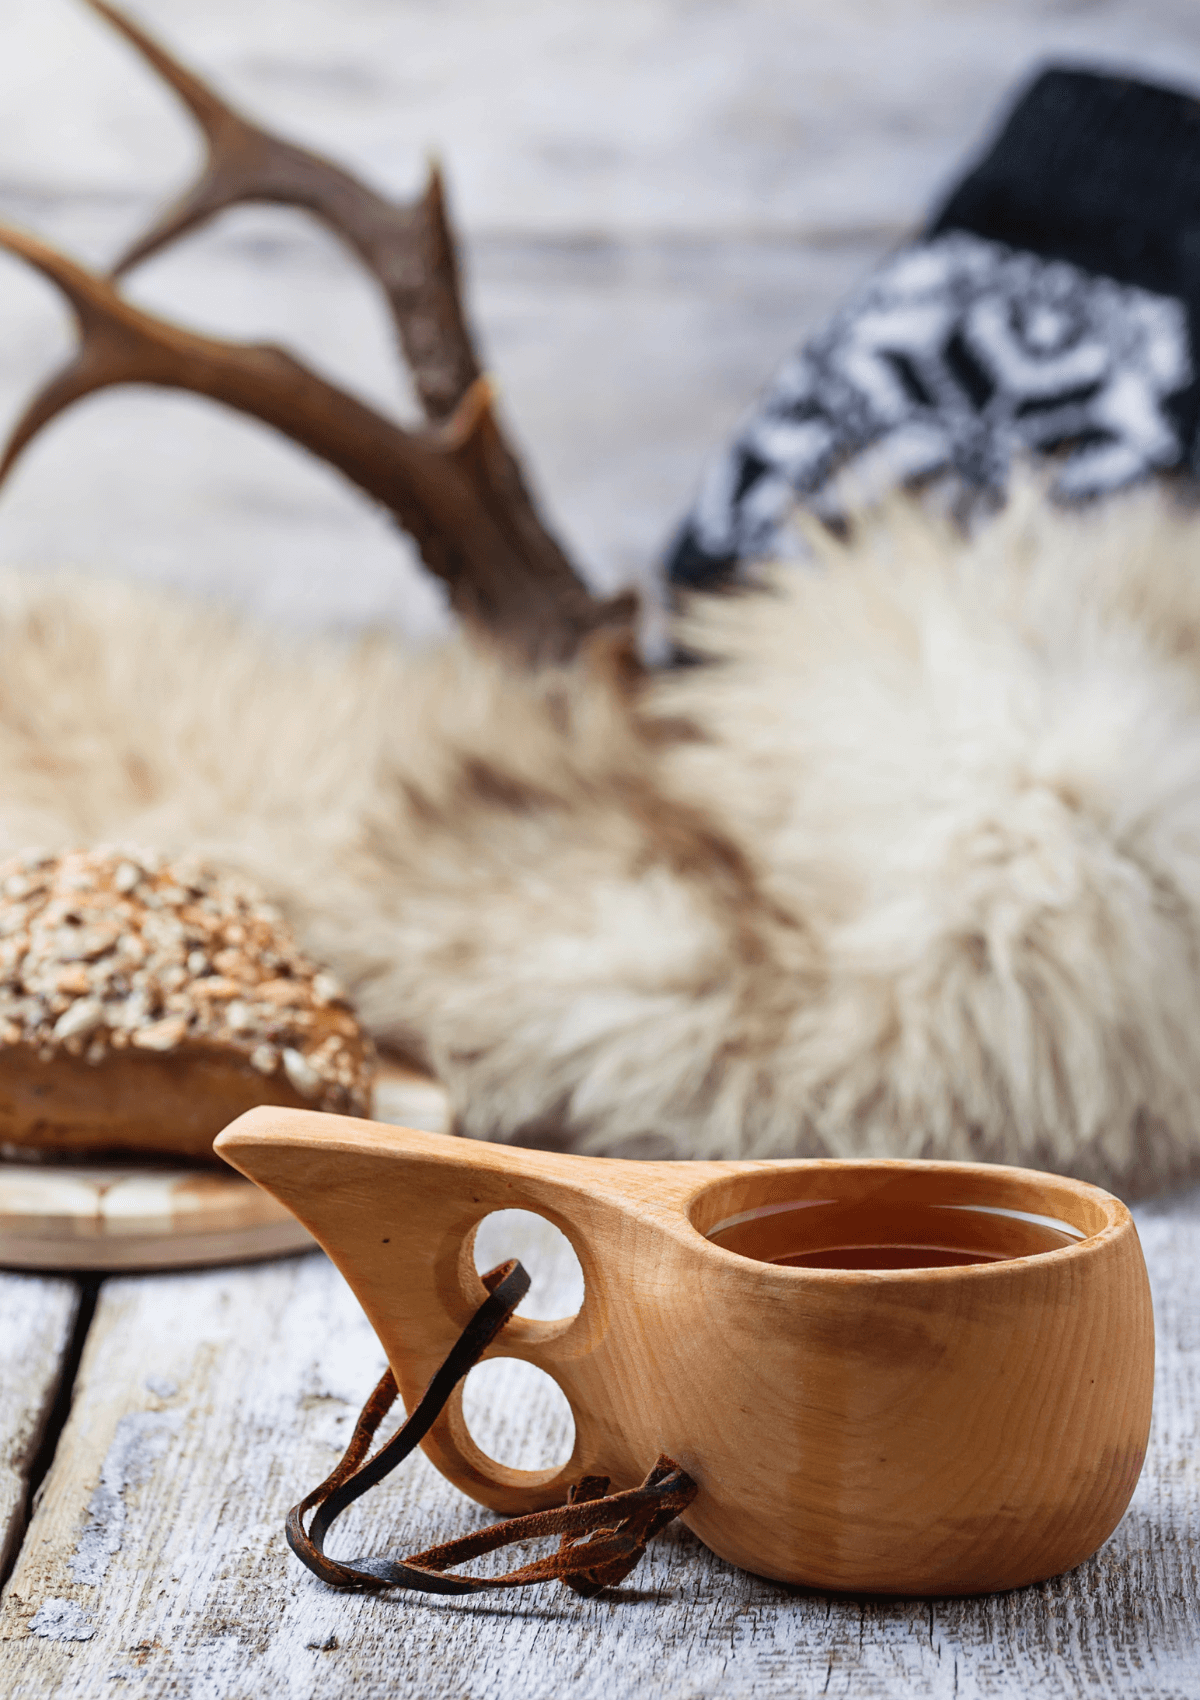 buy Kuksa cups from your trip to Finland